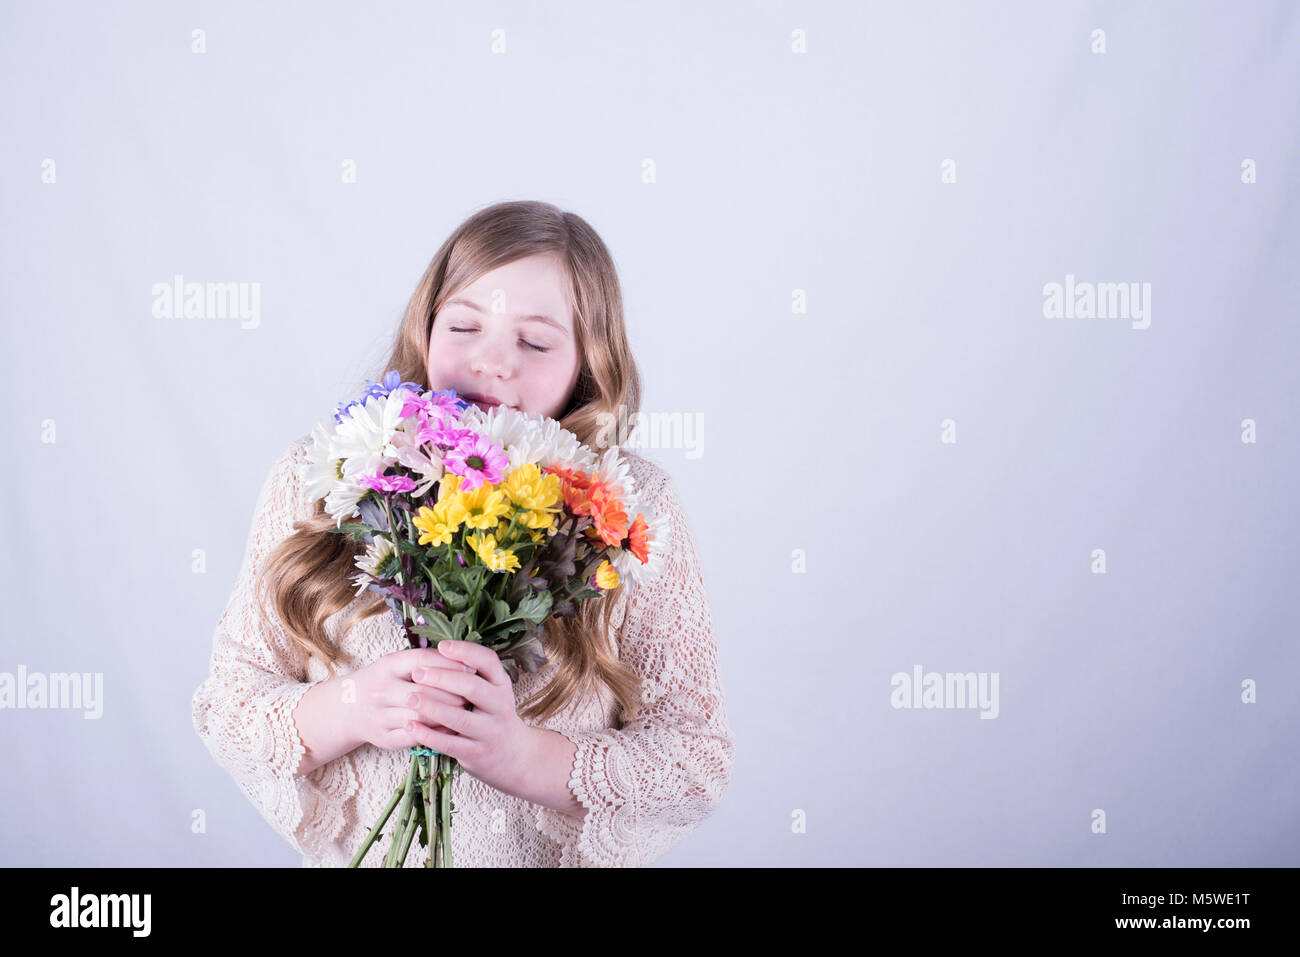 Smiling twelve-year-old girl with long, dirty blonde hair holding and smelling colorful bouquet of daisies with eyes closed against white background Stock Photo